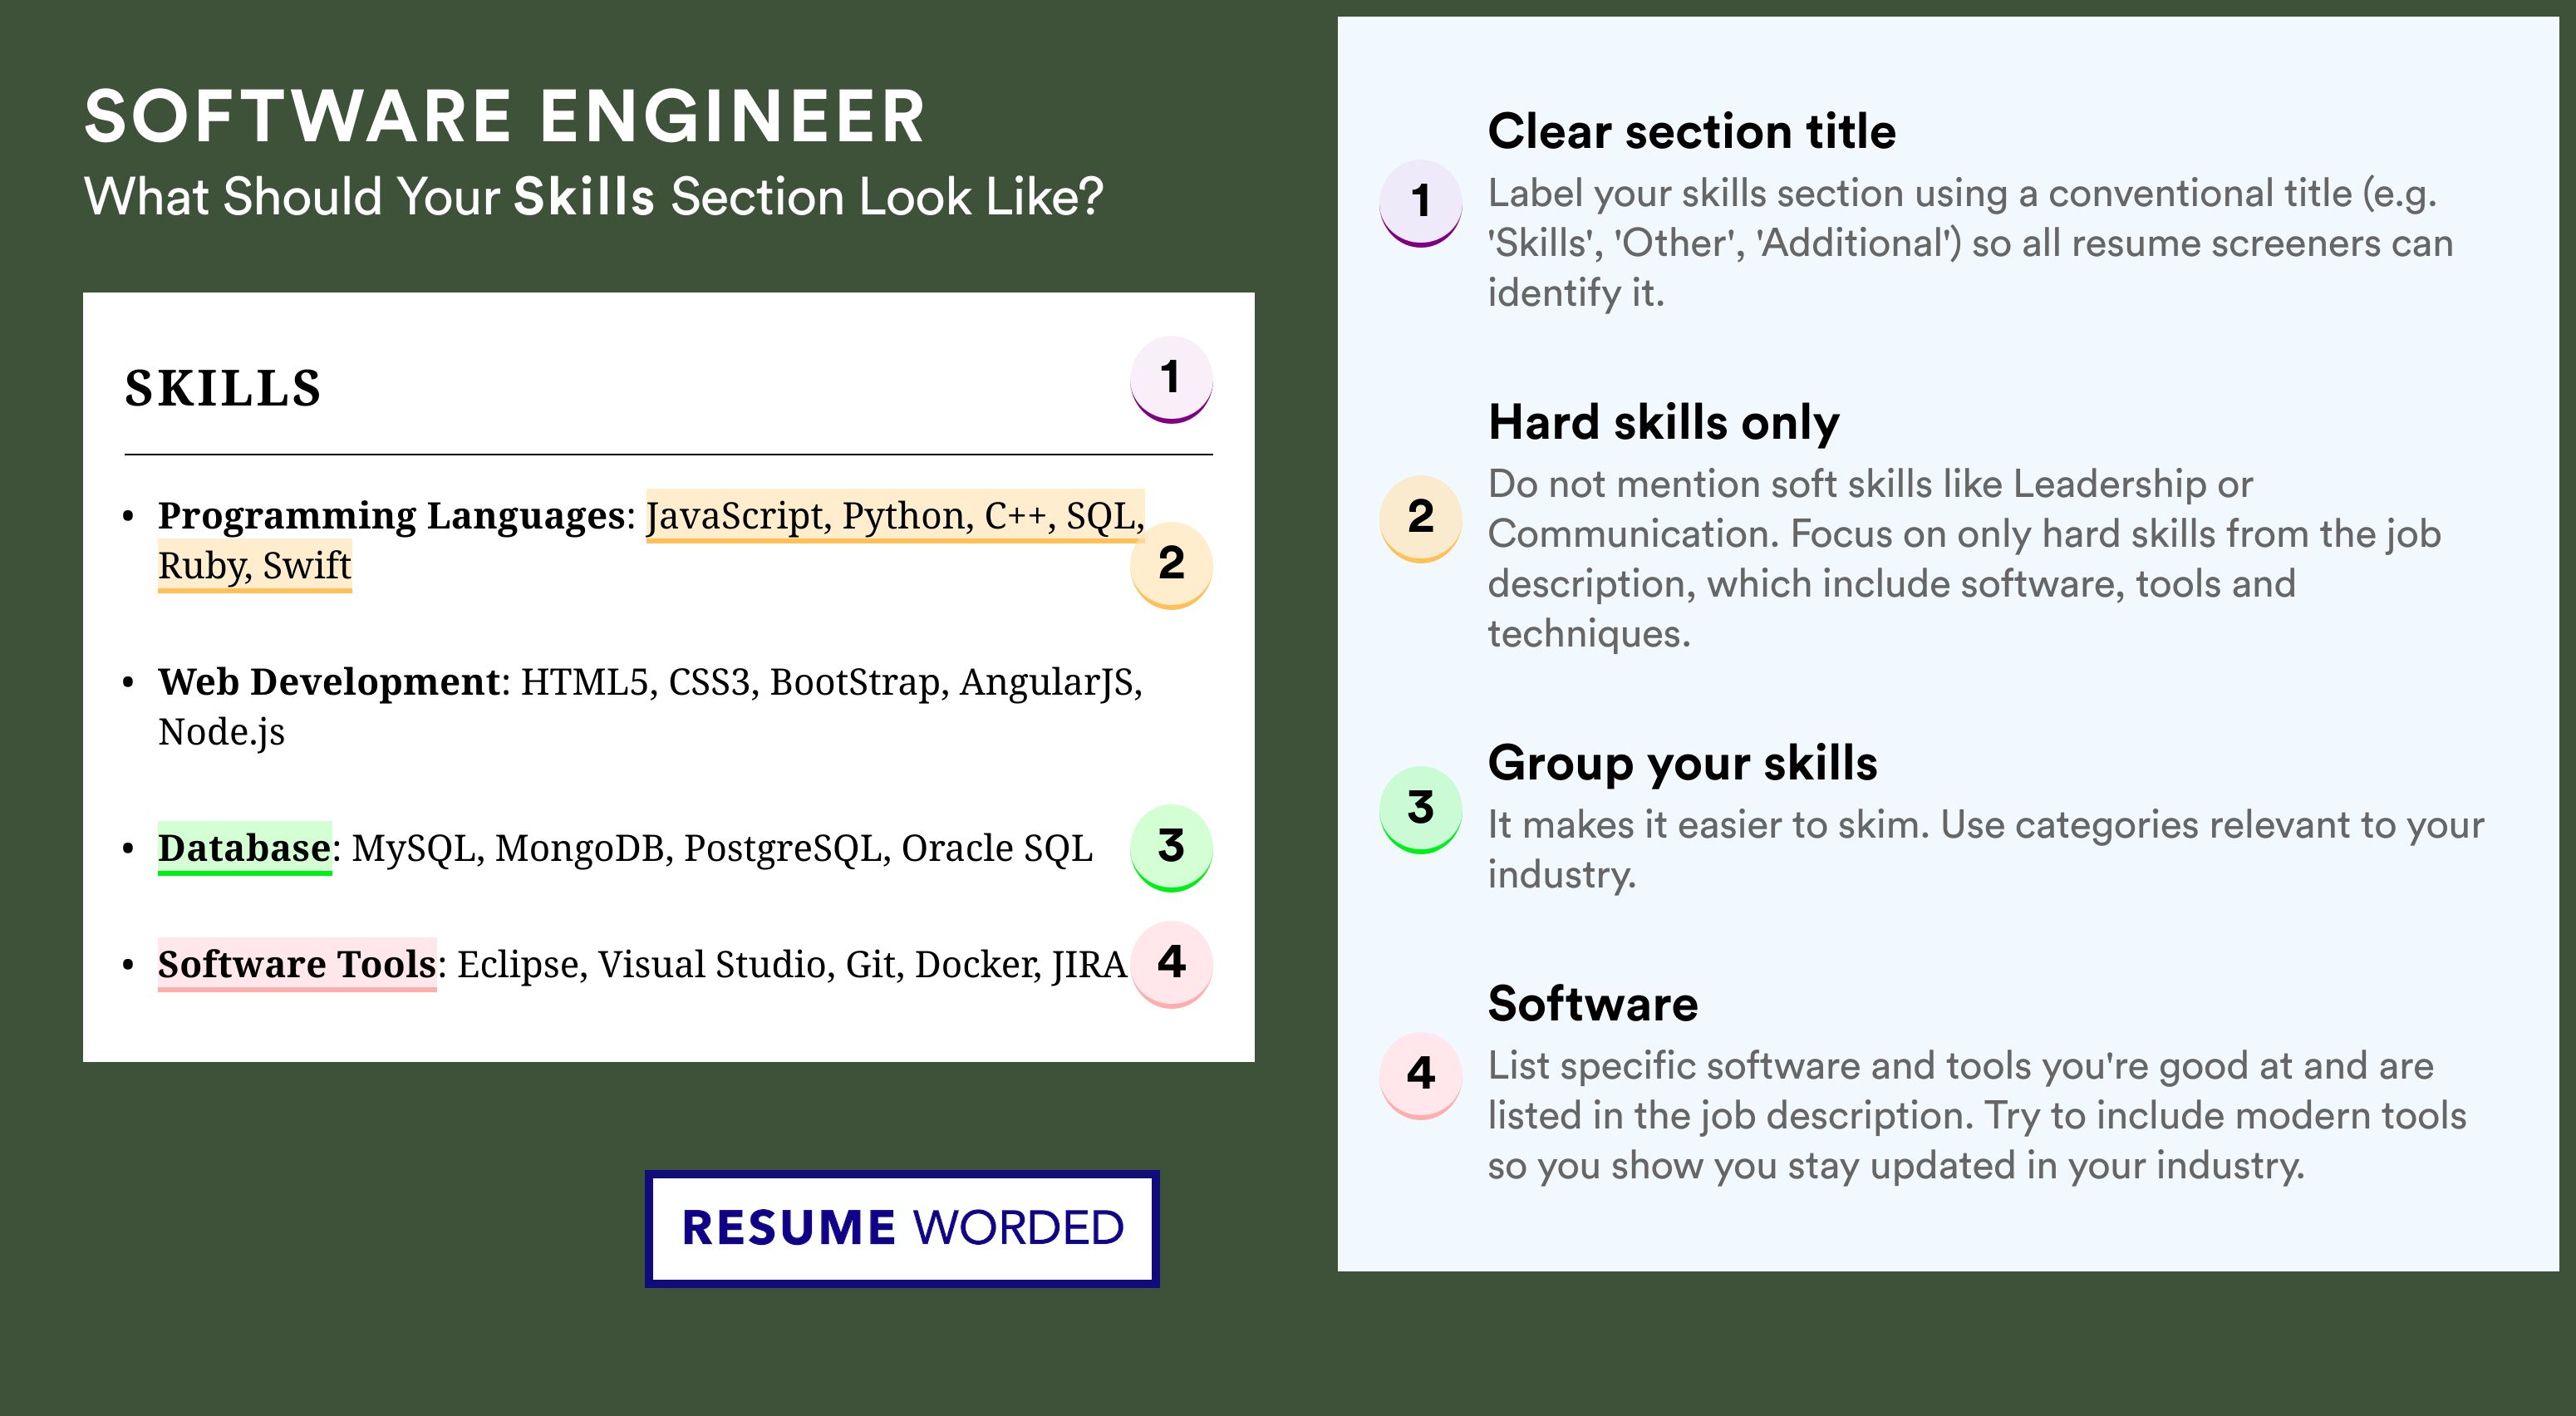 How To Write Your Skills Section - Software Engineer Roles